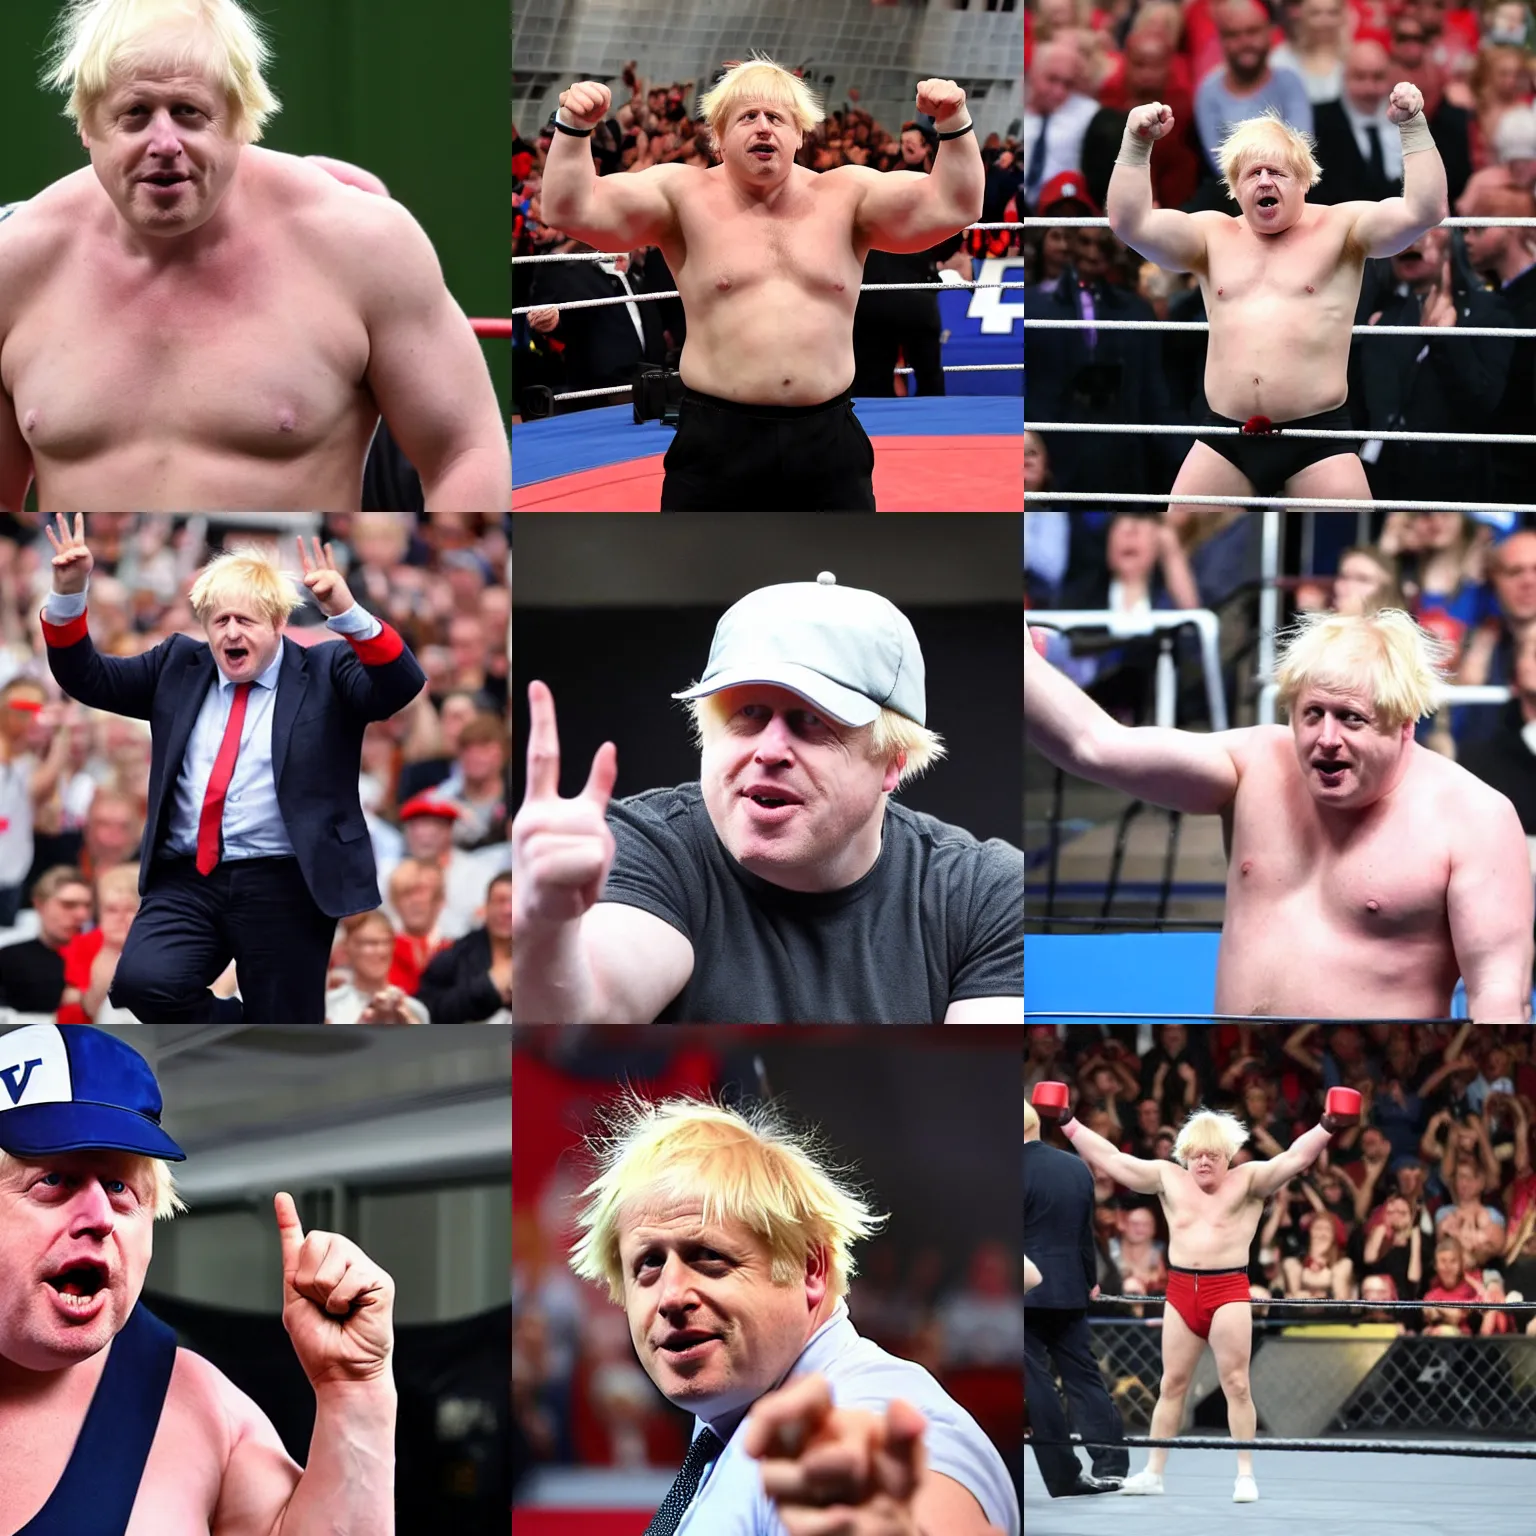 Prompt: boris johnson as a muscular wwe wrestler wearing a cap hat. he is angry and waving to the camera